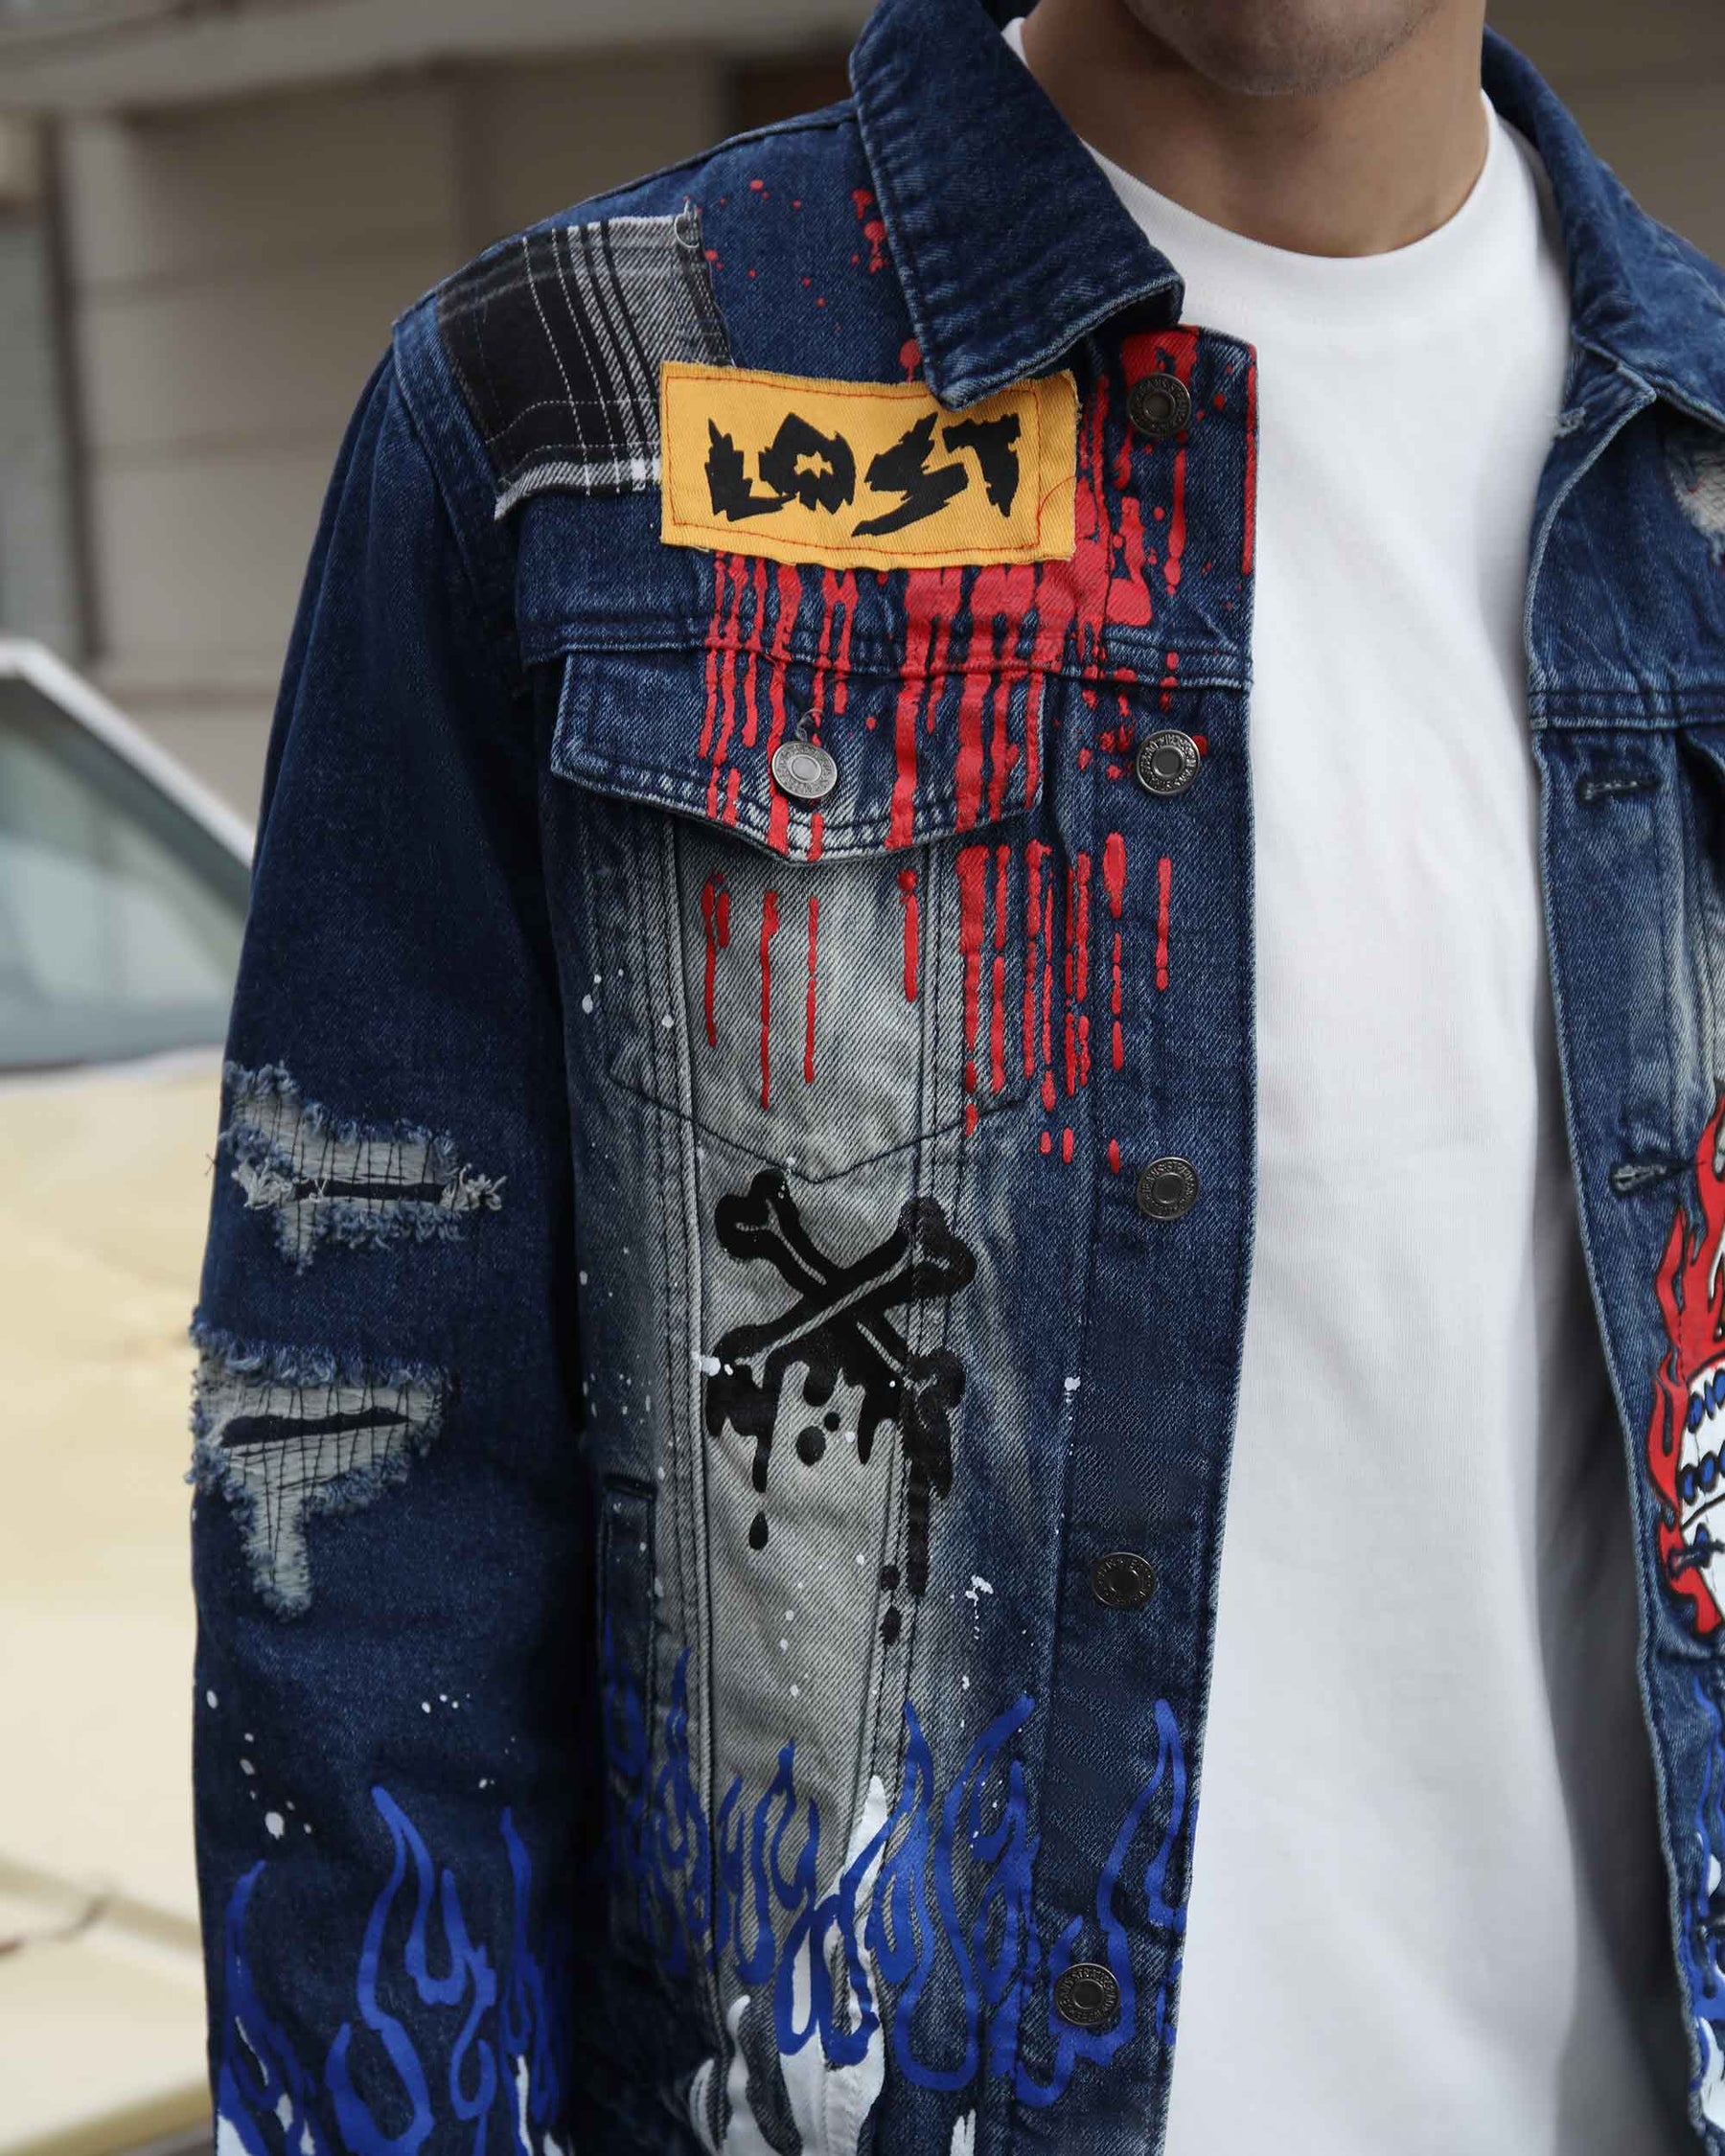 Blue Denim Jacket with Street Graffiti and Ripped